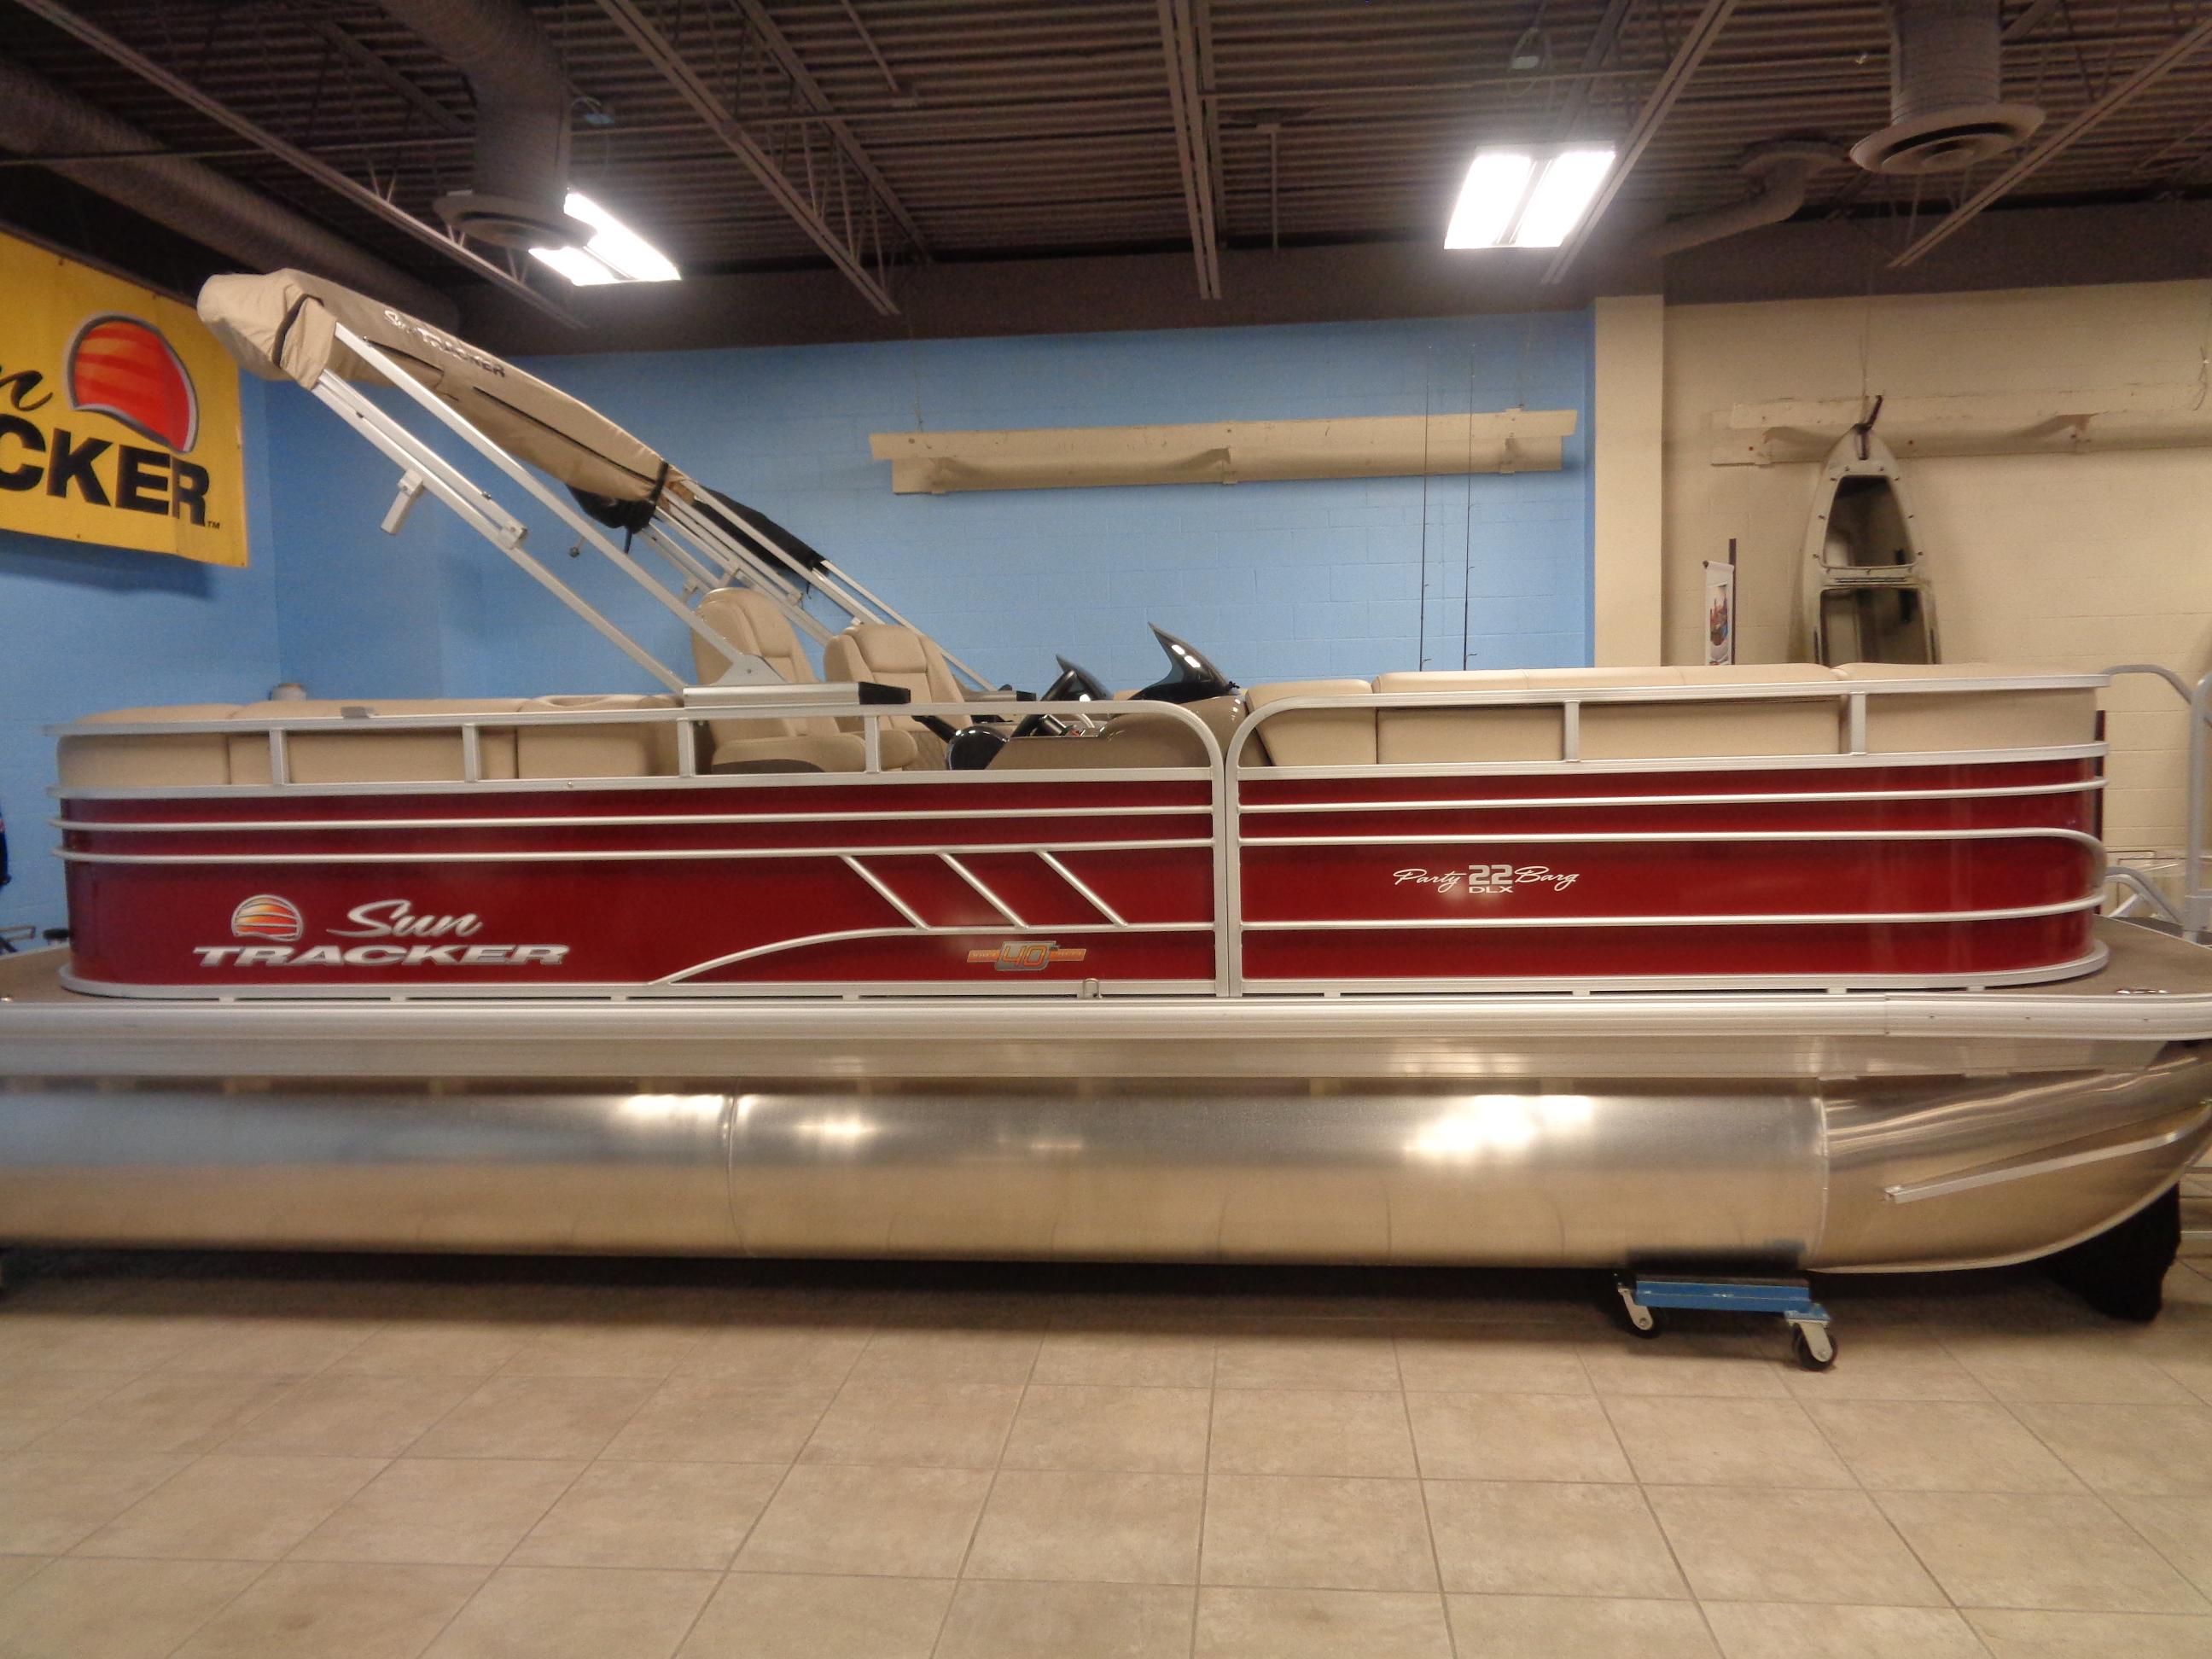 Shop Sun Tracker 22 Party Barge Boats For Sale - Boat Trader